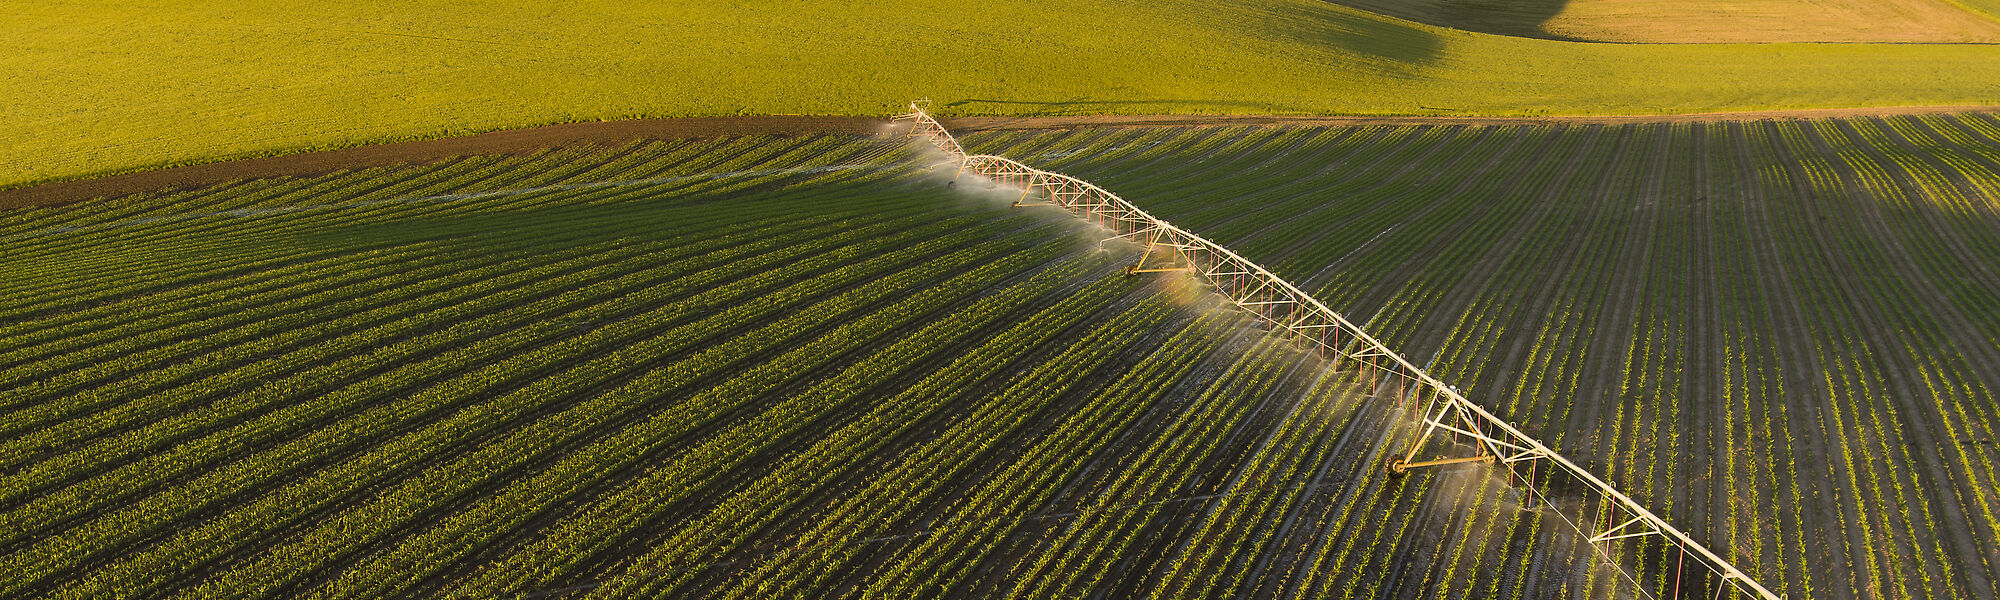 Center pivot with Nelson sprinklers irrigating corn